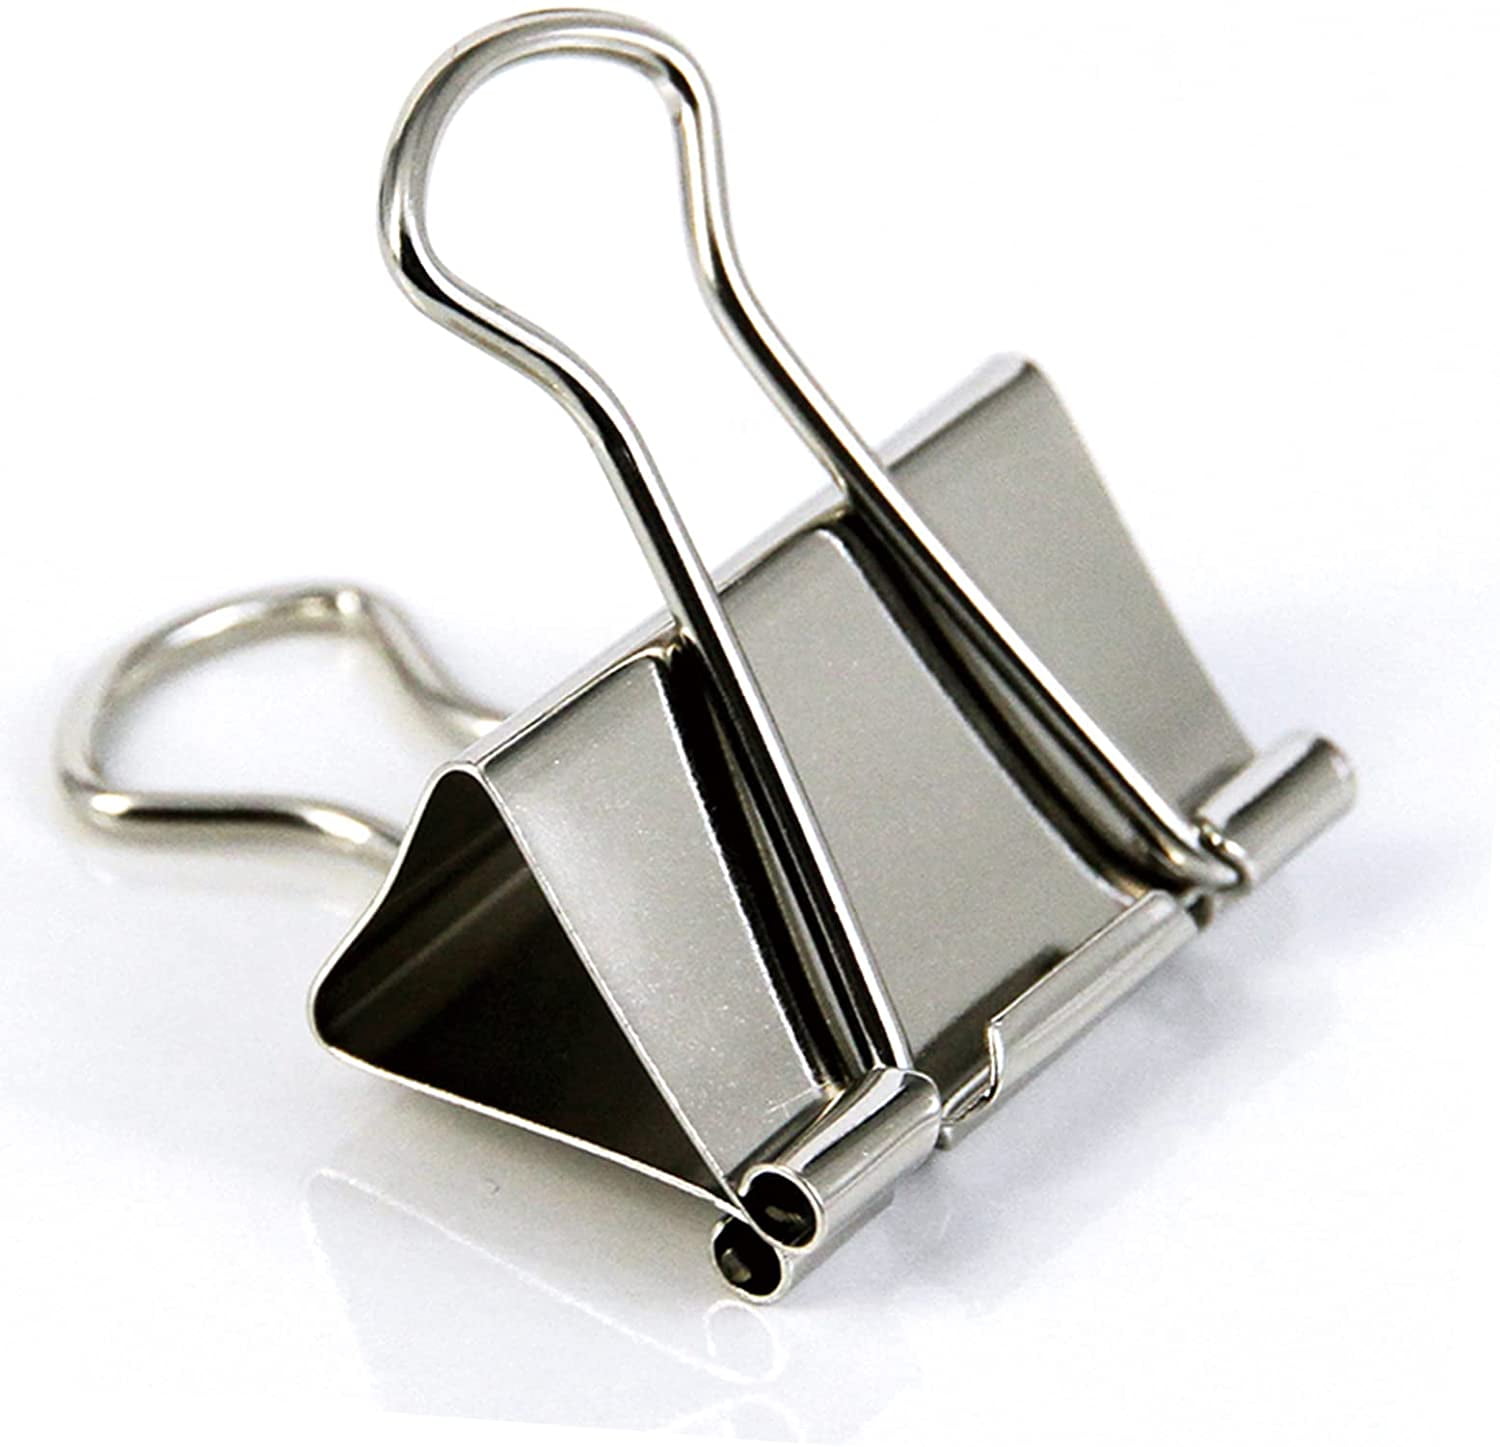 20 Pcs Binder Clips, 1.25 Inches Large Binder Clips, Premium